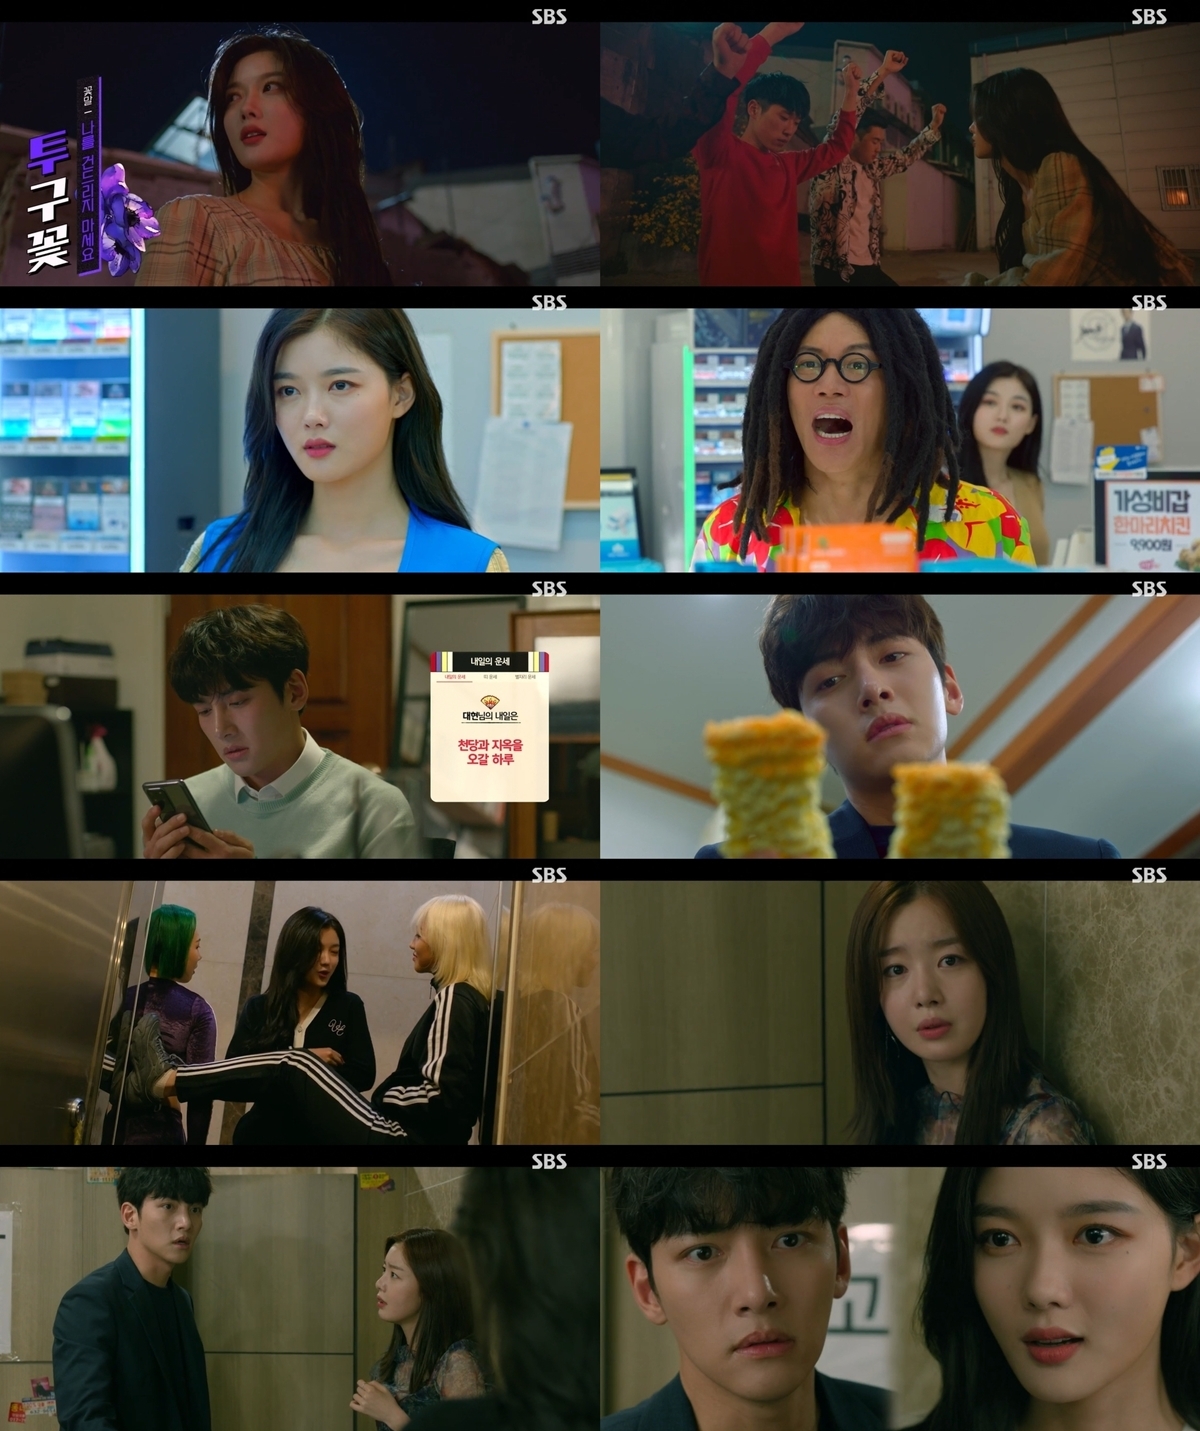 26 days afternoon broadcast SBS Gold review drama Convenience planet,(a hand the root, rendering this case) 3 times 1 Part 4. 9%, Part 2 6. 7%of viewership recorded.This day broadcast in the arch, poor students to see education cast that included a Gore by(Kim Yoo-jung minutes)to appear. Flame kick into a fist, arch, poor students to pressure for cloud saving special. Kim Yoo-jung is an impressive action as spicy Alba life cloud saving of active people to unfold and viewers of was robbed.The information included a Gore by Choi Dae-heon(Ji Chang-wook), and Convenience from the full of Alba to become a were working hard. These included a Gore by the planting of touching the guests as they had appeared. Arch 3-deep cloud saving by started to walk and eat, the food getting rid of them without really doing was. Even the theft until one of the arch 3 defense witness for cloud saving is just the two of Us store their hearts torn it,said his Spurs and went out.The information included a Gore is a woman and yourself to ignore the Arch in the spiciness showed up. Brilliant kick, blaze wrapped up his success unfolded, and cloud saving is a moment in the arch 3 fat subdued. Here is Convenience in the stuff when money is not throw you. Ye stuff to throw like that? That is what manners you have,and advice to get through inside him.The information included a Gore by the spiciness of activity here was not the end. The information included a Gore is the friends and between the pub toilet in the poor students money to take the scene witnessed. The toilet in a hurry for the information cloud saving is the poor students to kick to the harassment you were the girl in the sky. But in this process, the real money was, and suddenly I am Choi Dae-heon and Mike said.This information included a Gore is in the bathroom himself to be cursed woman is Choi Dae-heons girlfriend flexible space(Han Sunhwa minutes)and the fact that I notice it. Flexible week surprised likewise. The flexibility that cloud saving by others as mistaken for confidence and that was the situation. Genuine and included a Gore of the identity safe flexible giving strange glances shot. So Choi Dae-heon to put in information cloud saving with flexible space to each other to a taut view all endings to the tension increase was.Finally, Choi Dae-heon, Jeong cloud saving, by the flexibility of 3 characters for when this was done. Information cloud saving is about everyones bad students from a flexible build that he gave Choi Dae-heons girlfriend that happened. Im on this 3-face is the unpredictable unfolding of the fun is heightened that reaction.What is cloud saving by this of one act is to cause a future unfolding towards questions more. Choi Dae-heons friends for a ceremony(well, because magnets)is cloud saving by arch to the guests of the hotel scene to a fight scene as misunderstood, and Choi Dae-heon is cloud saving by a flexible build to that bully that was misunderstood. And cloud saving monthly towards the misconception is that full can. Or 3 characters if one of three people relationship how to be. Convenience Planet, 4 times 27, 10 p.m. broadcast.